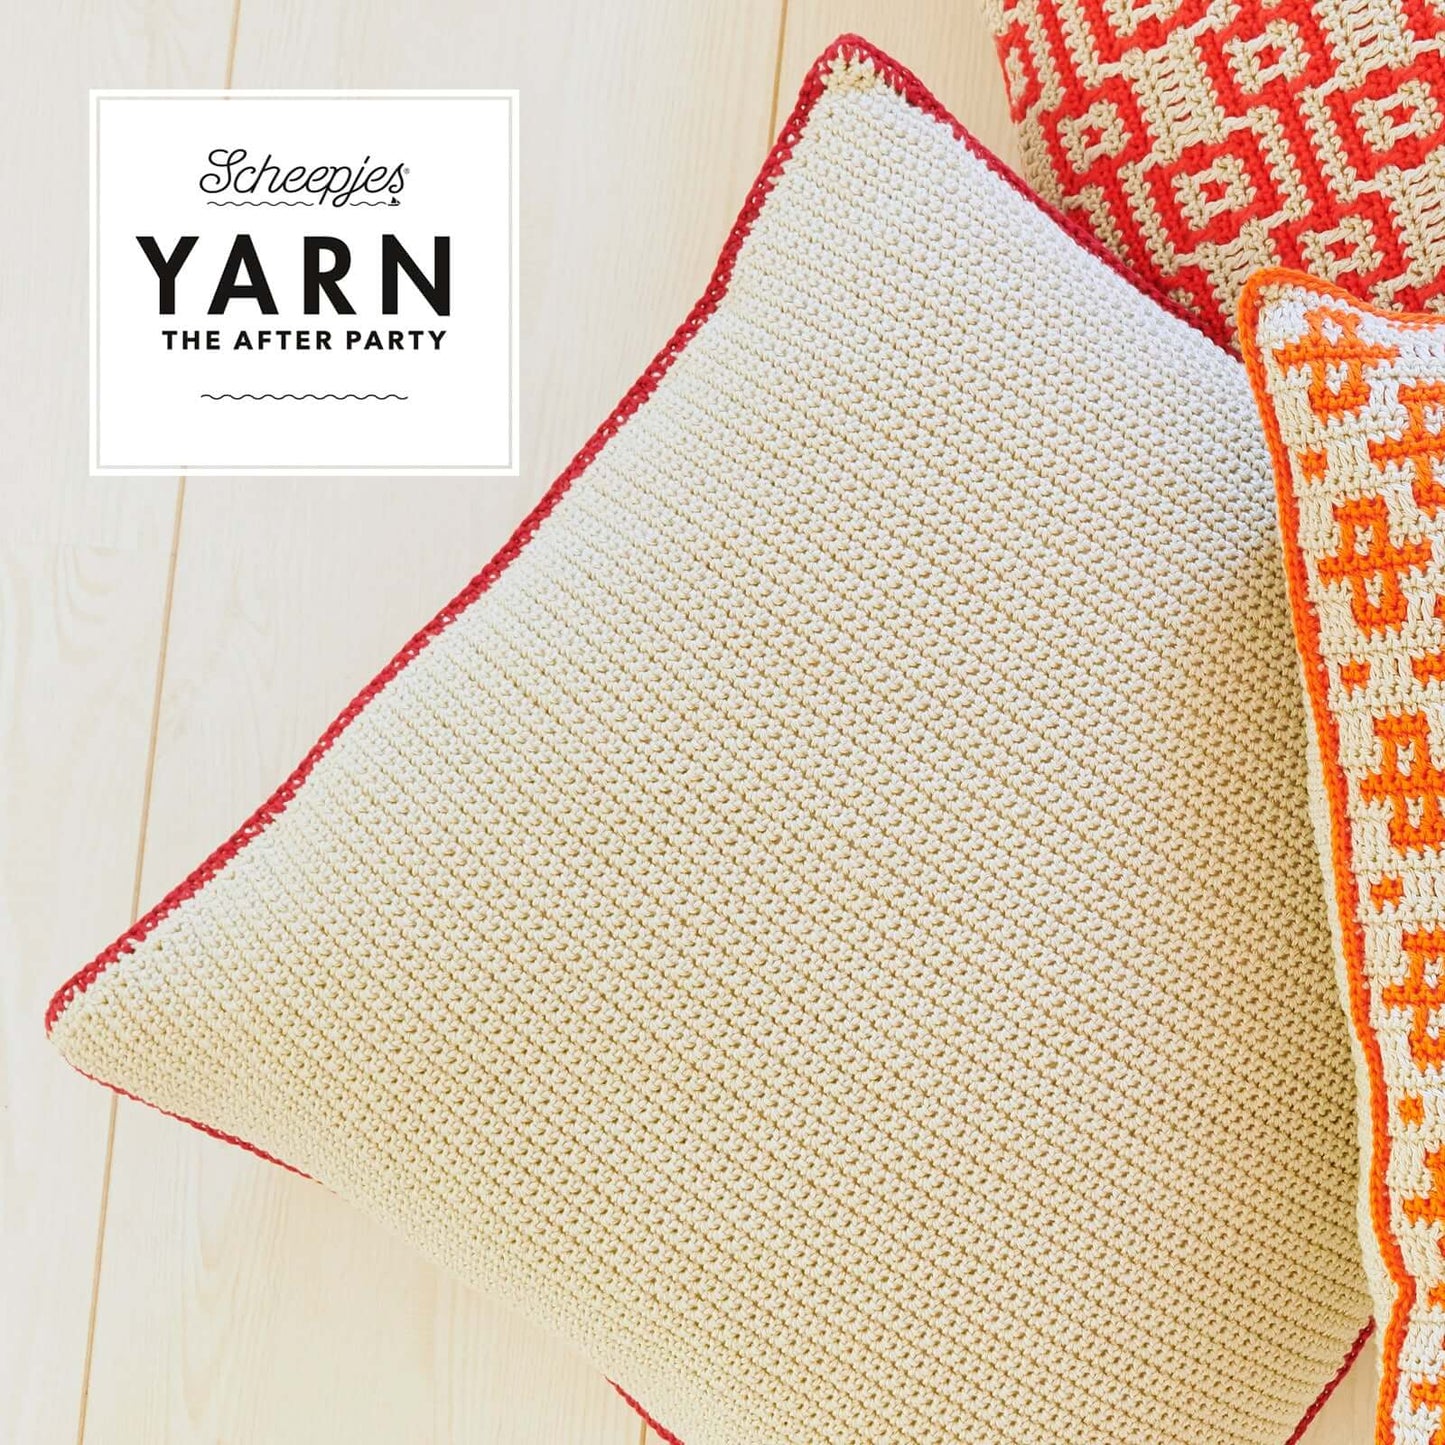 Scheepjes Yarn The After Party no. 44 - Busy Bees Cushion (booklet) - (Crochet)